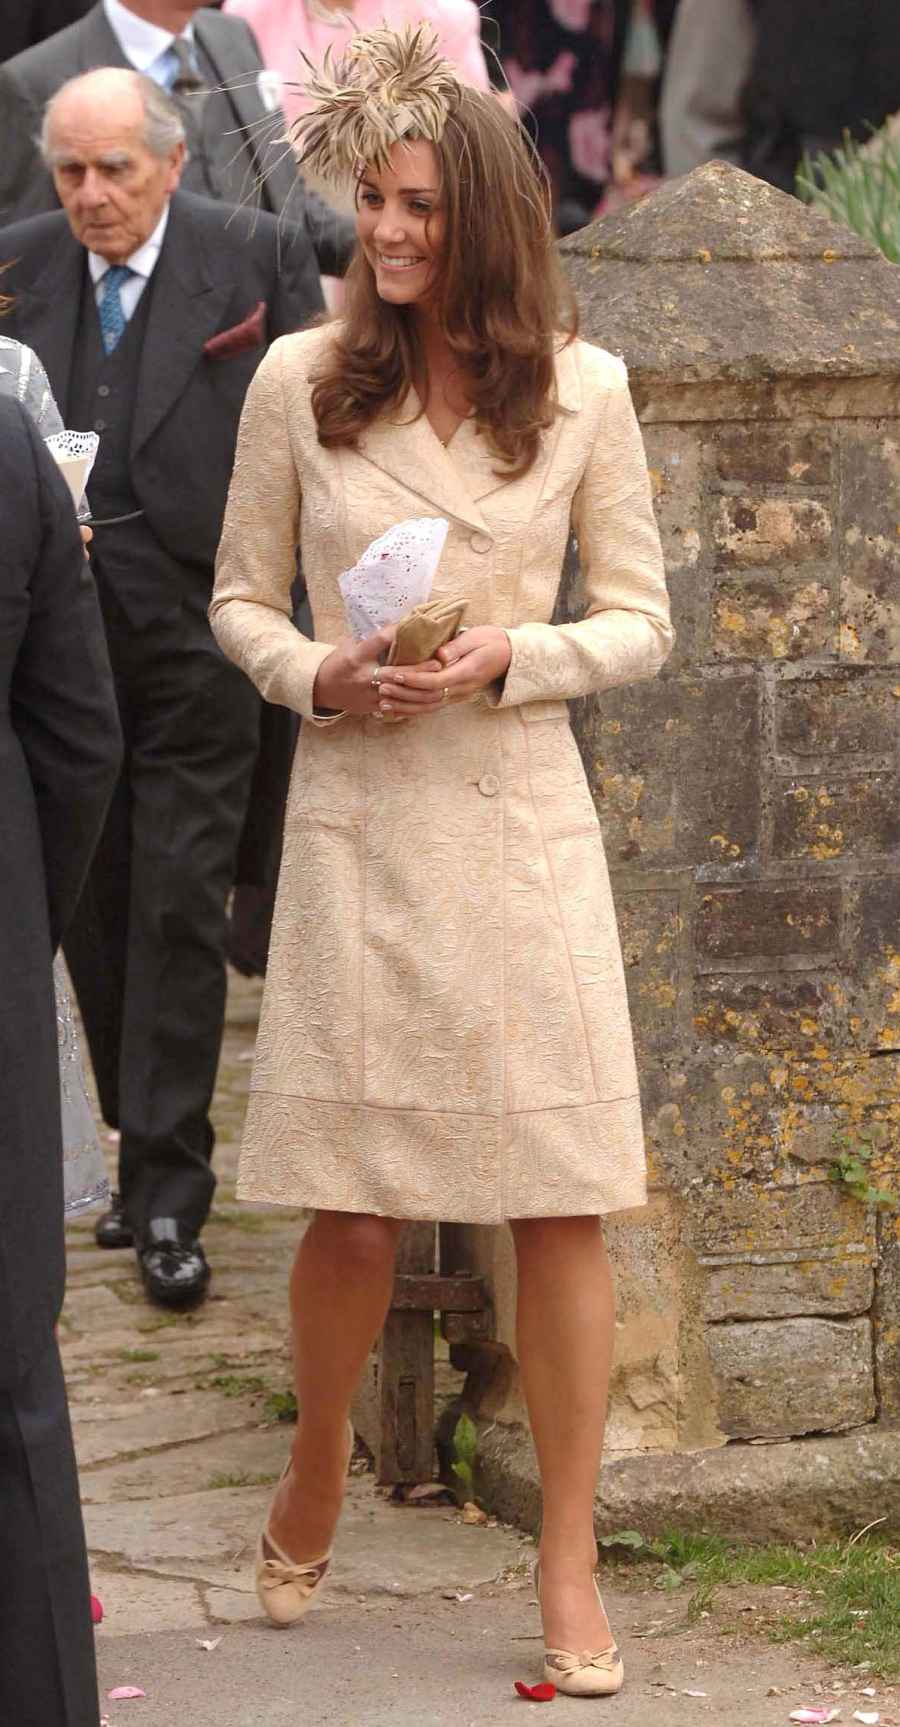 Kate Middleton's Style Evolution - May 2006